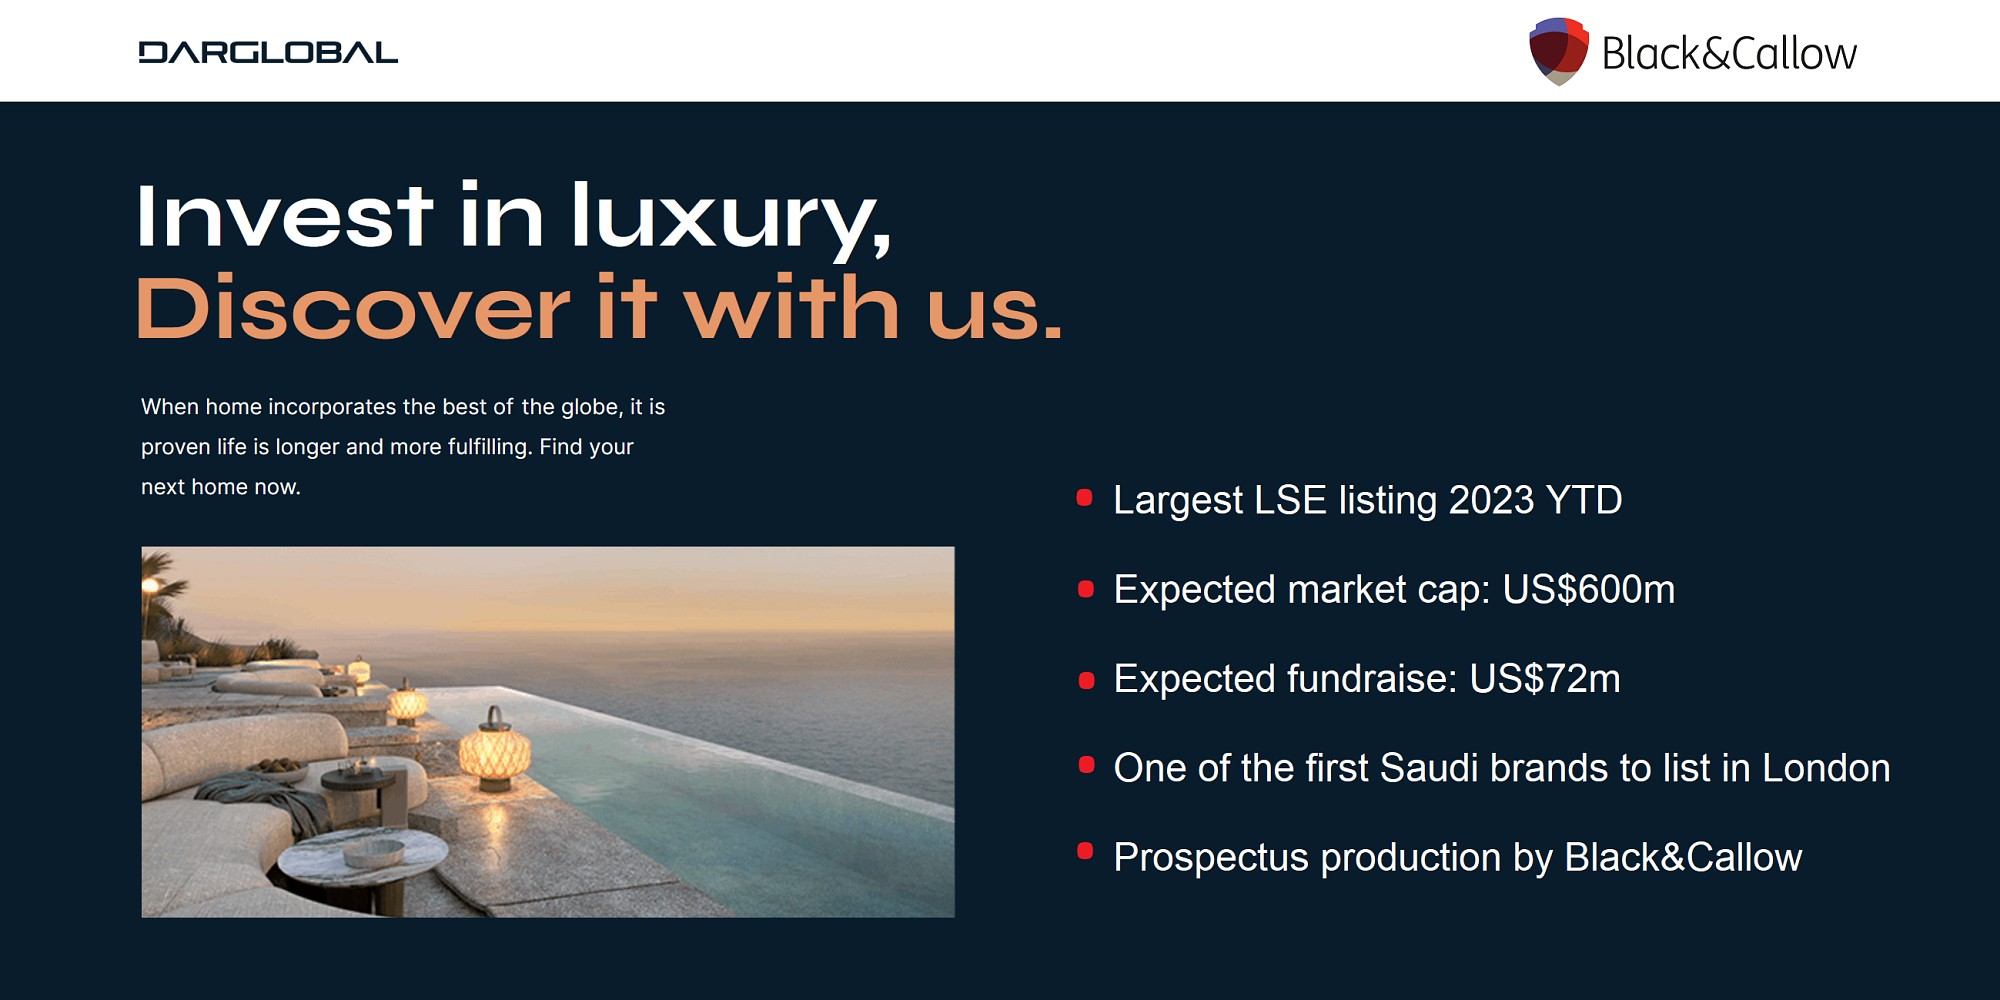 Black&Callow helps with largest IPO this year: luxury brand DarGlobal